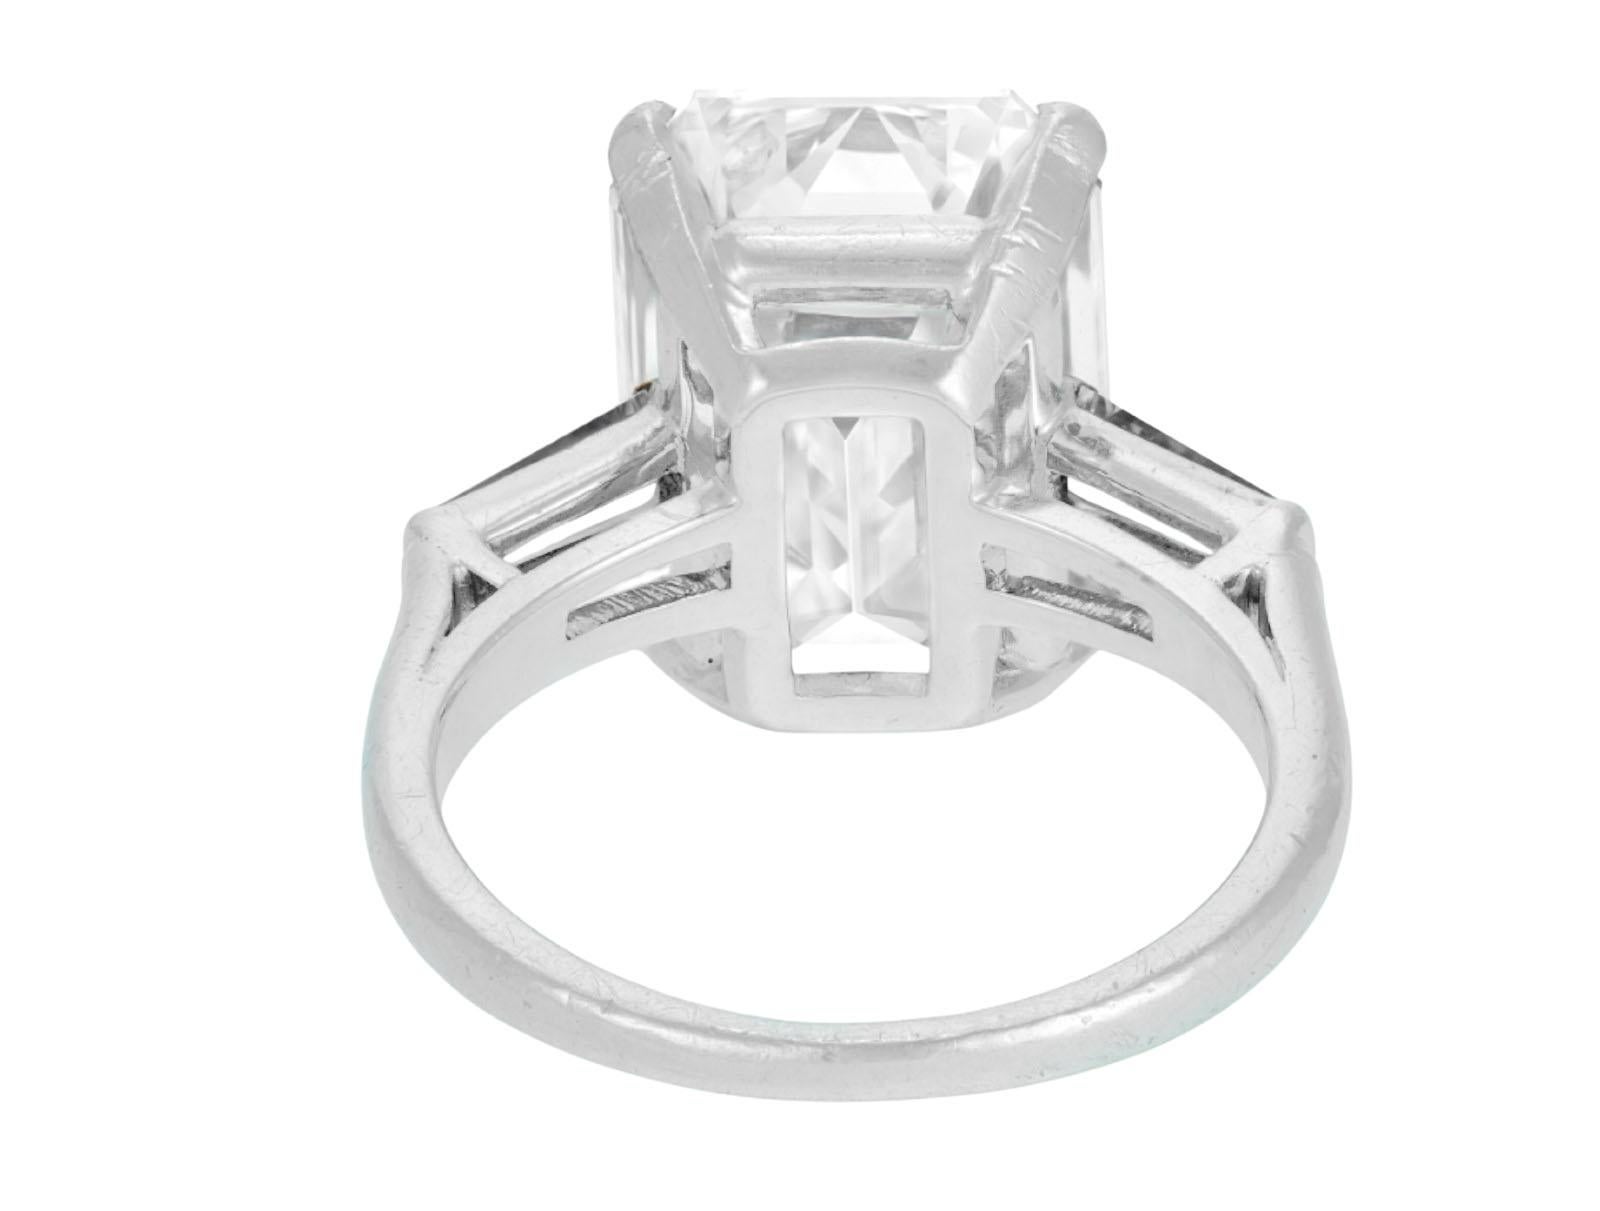 Unrivaled Opulence: GIA Certified 12 Carat Flawless D Color Type IIA Emerald Cut Diamond Ring!

Prepare to be captivated by the pinnacle of luxury and sophistication with our exquisite creation featuring a GIA certified 12 carat emerald cut